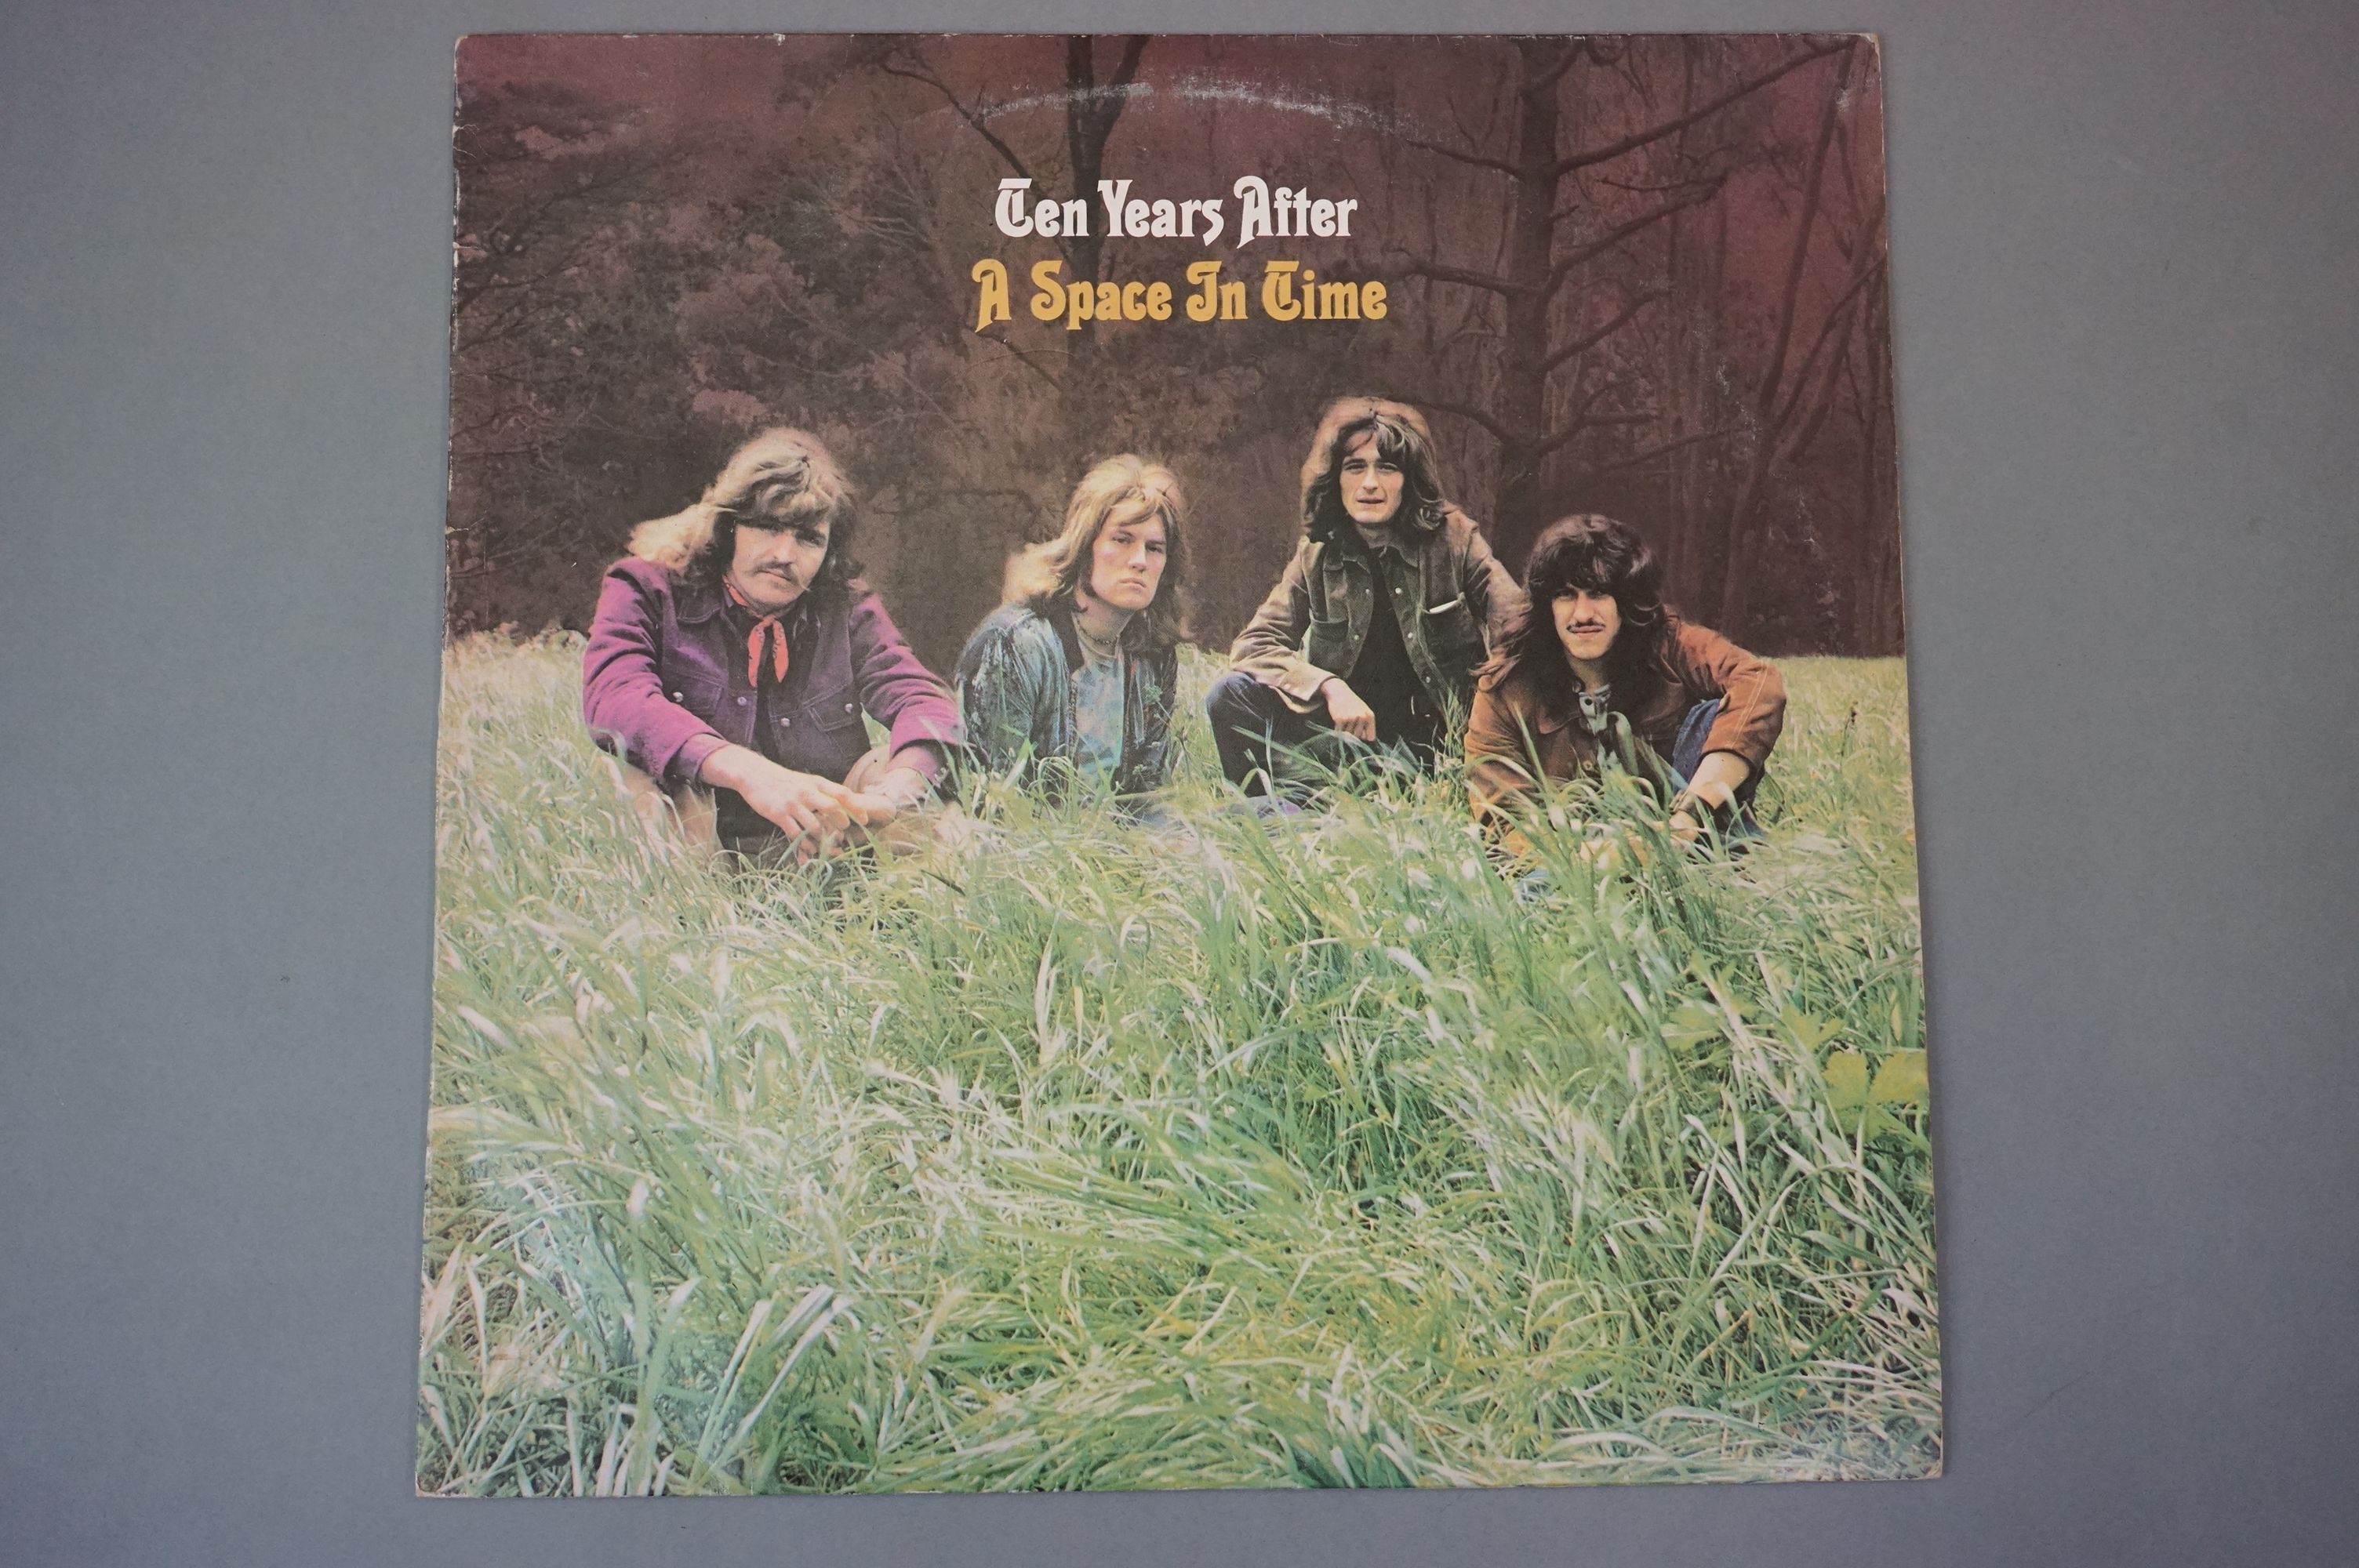 Vinyl - Ten Years After A Space In Time (CHR 1001) Green label with manufactured and distributed